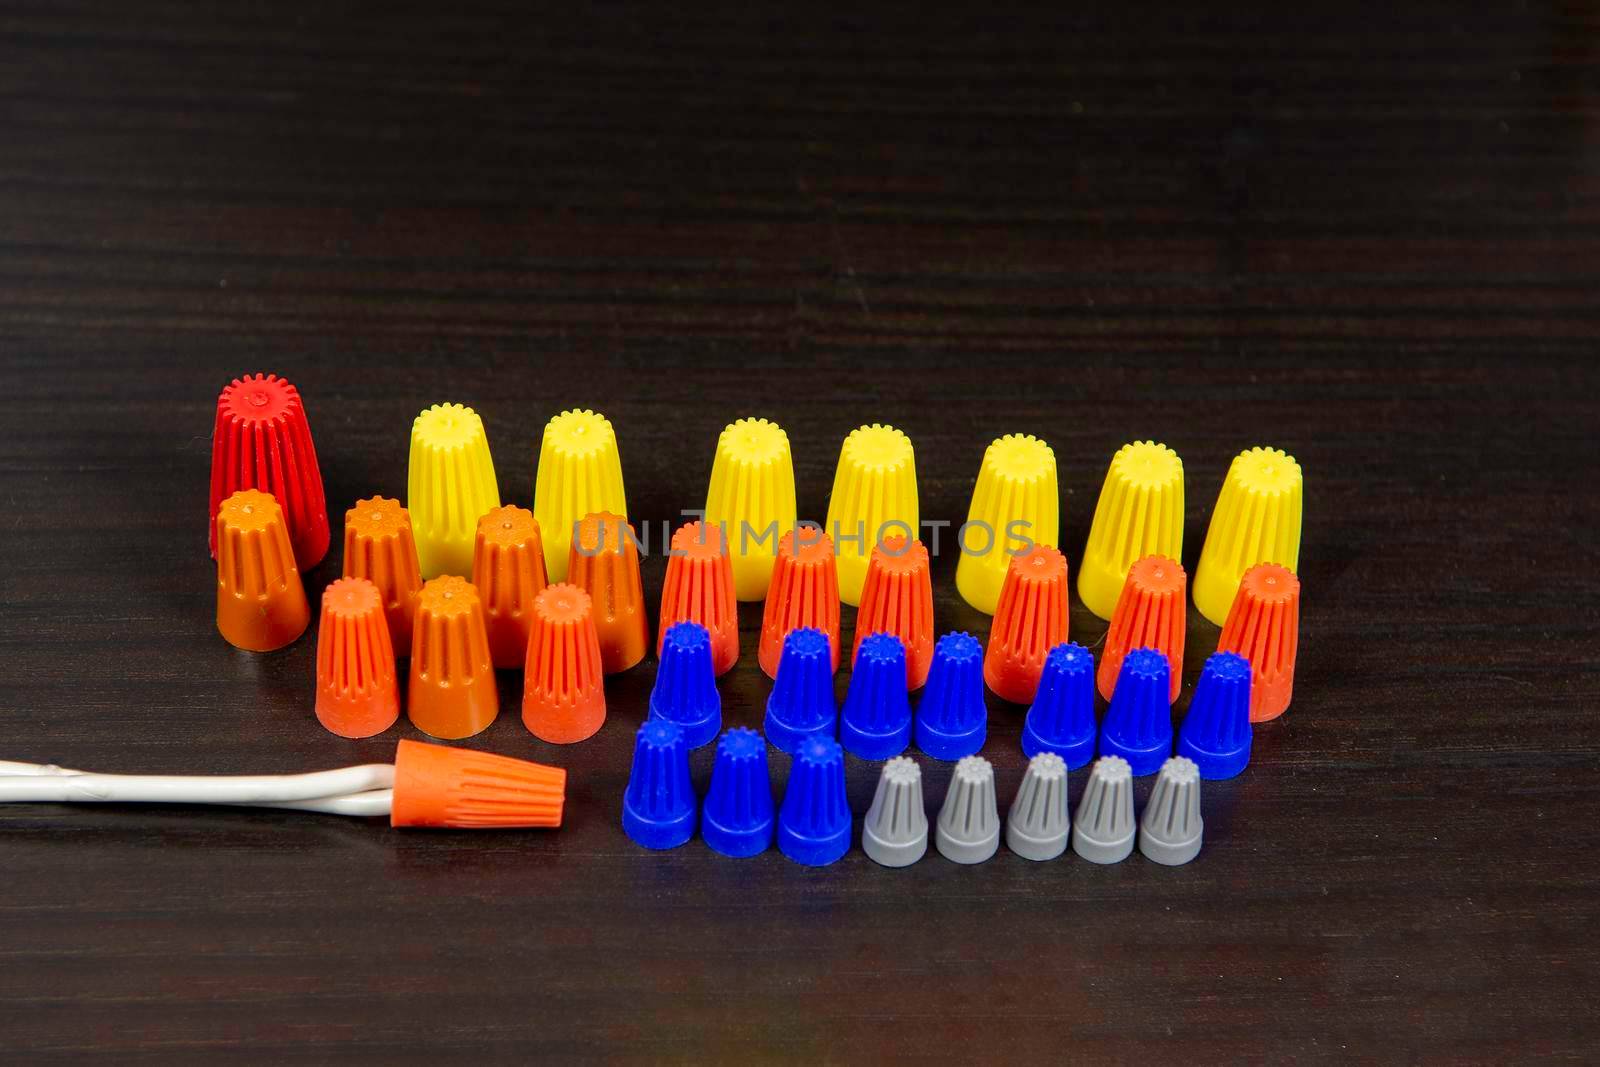 Insulator caps in different colors and sizes for bare ends of twisted wires and stranded wires